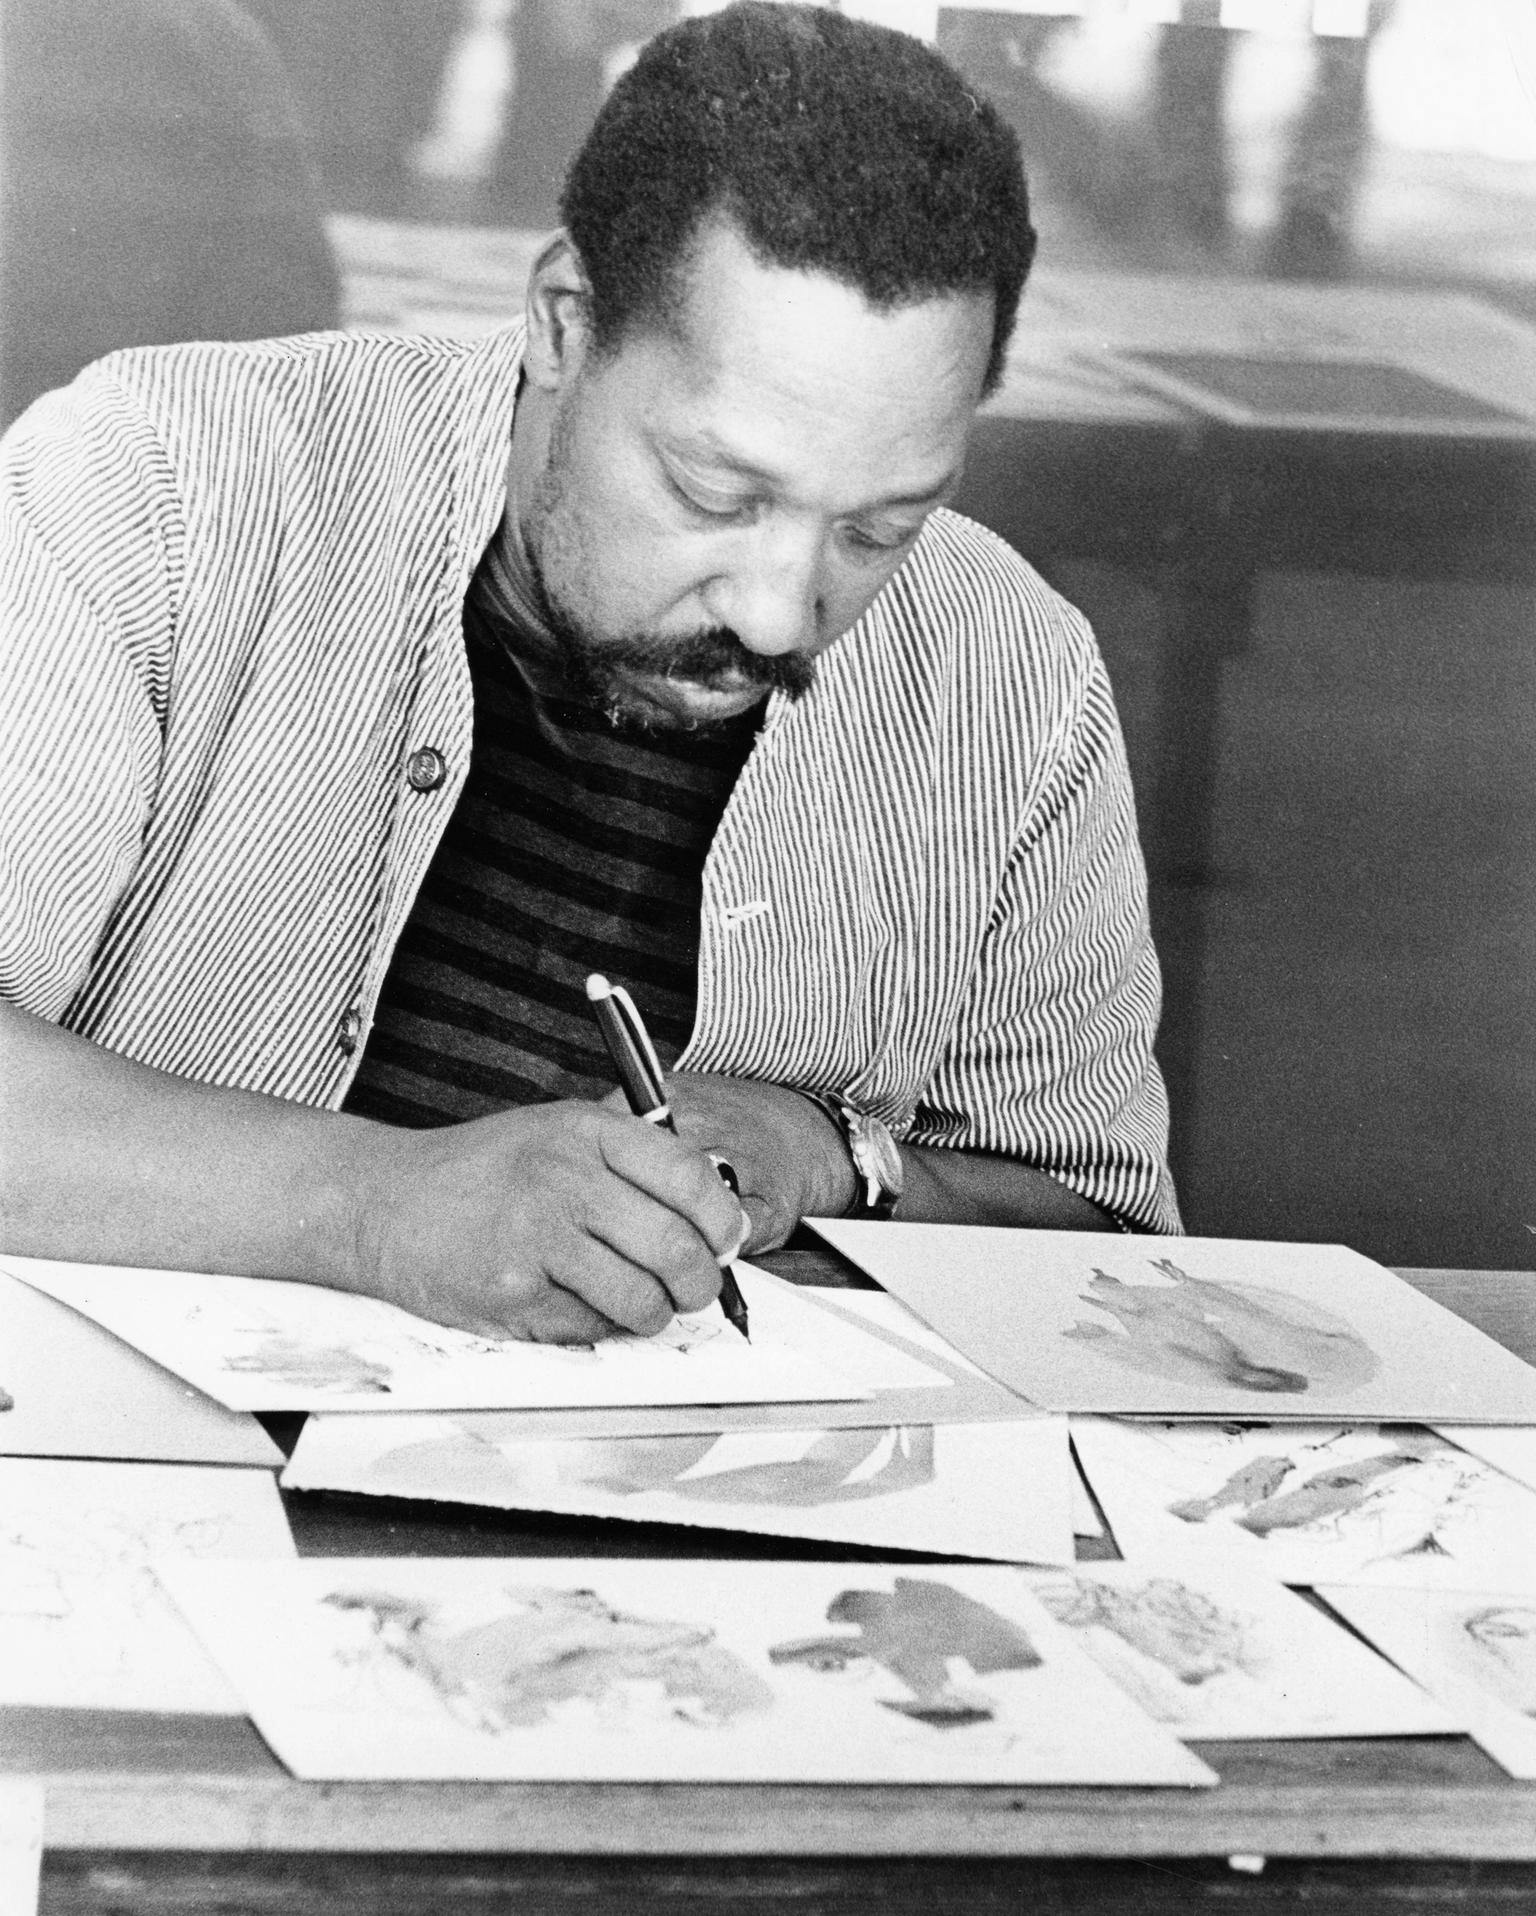 A black and white photo of a man drawing